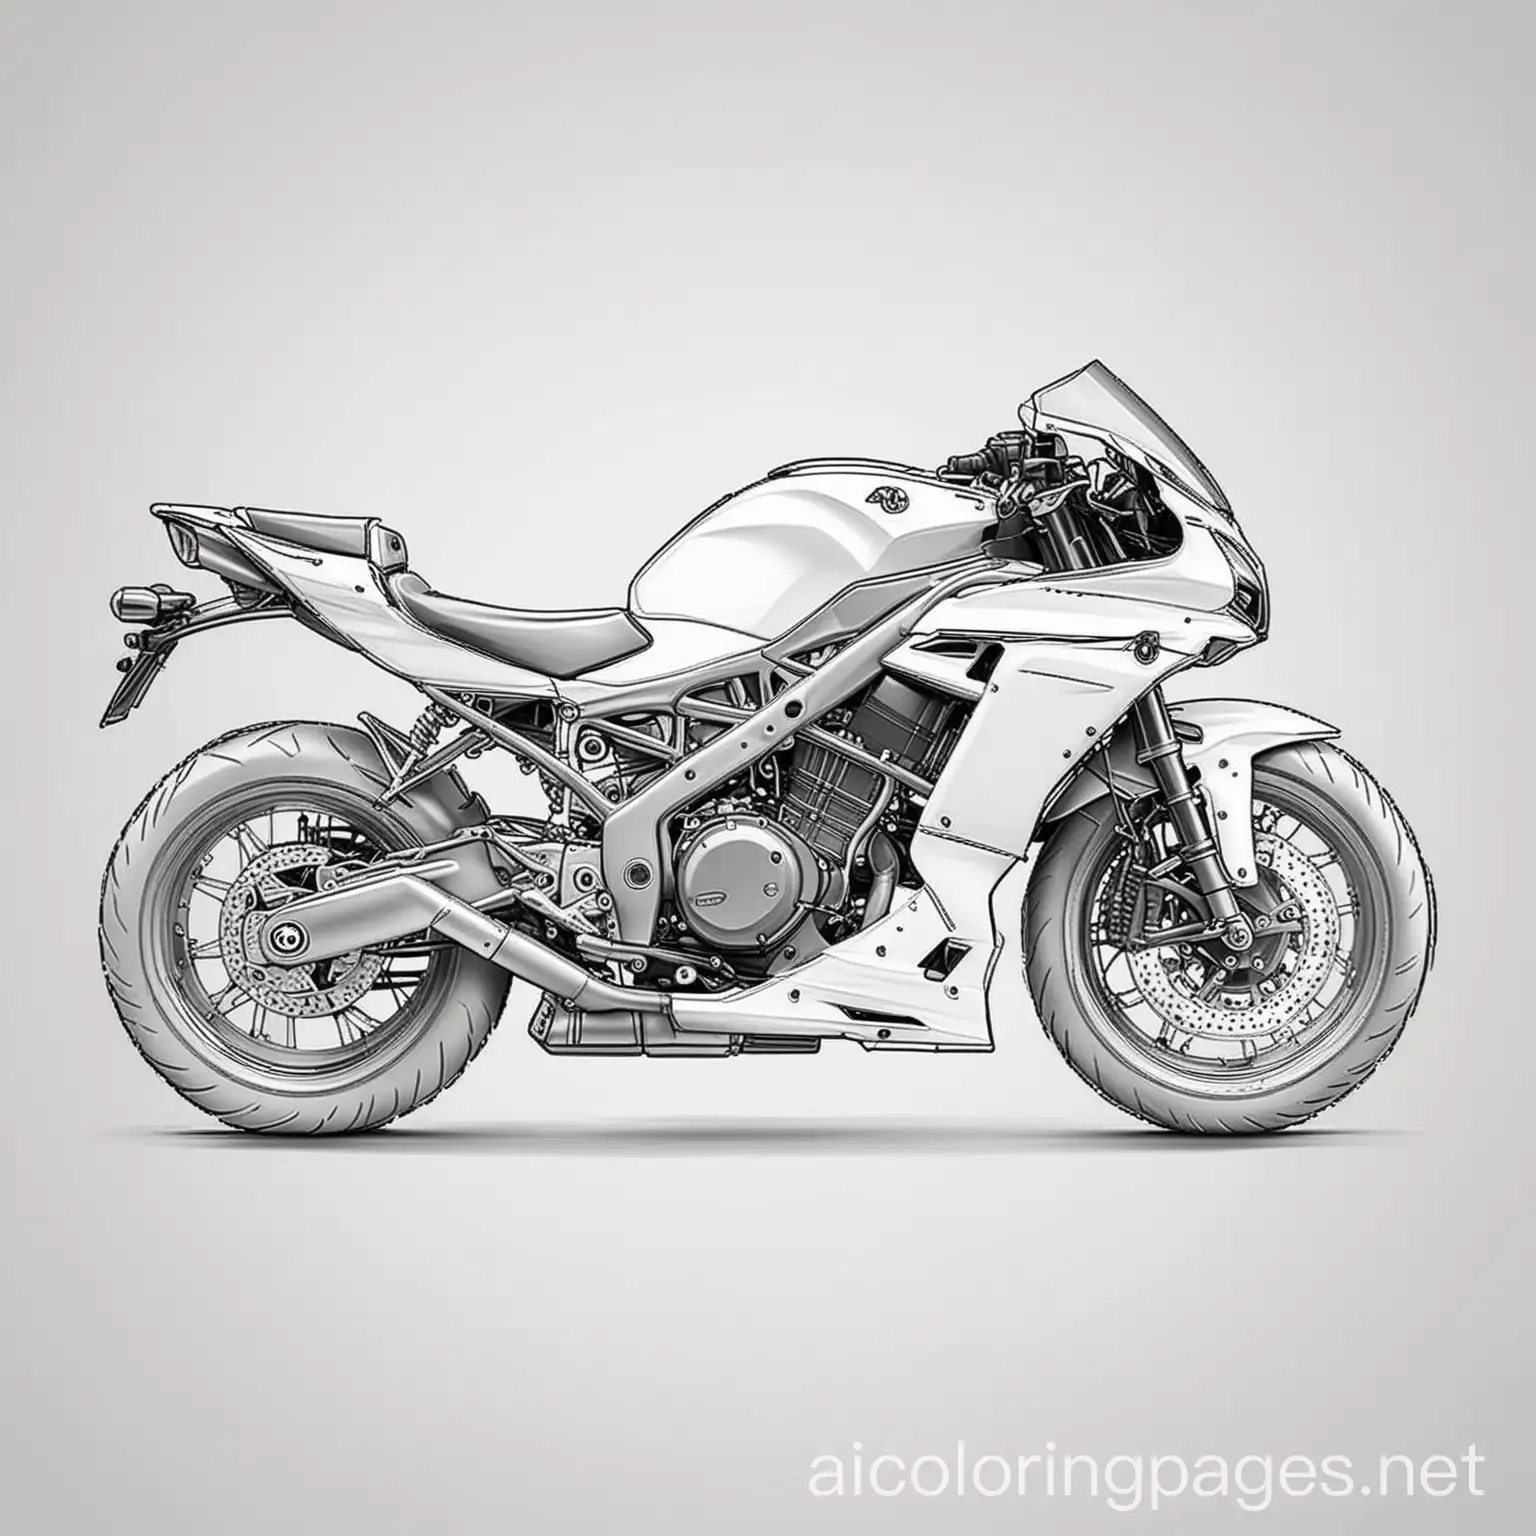 cool motorcycle, Coloring Page, black and white, line art, white background, Simplicity, Ample White Space. The background of the coloring page is plain white to make it easy for young children to color within the lines. The outlines of all the subjects are easy to distinguish, making it simple for kids to color without too much difficulty